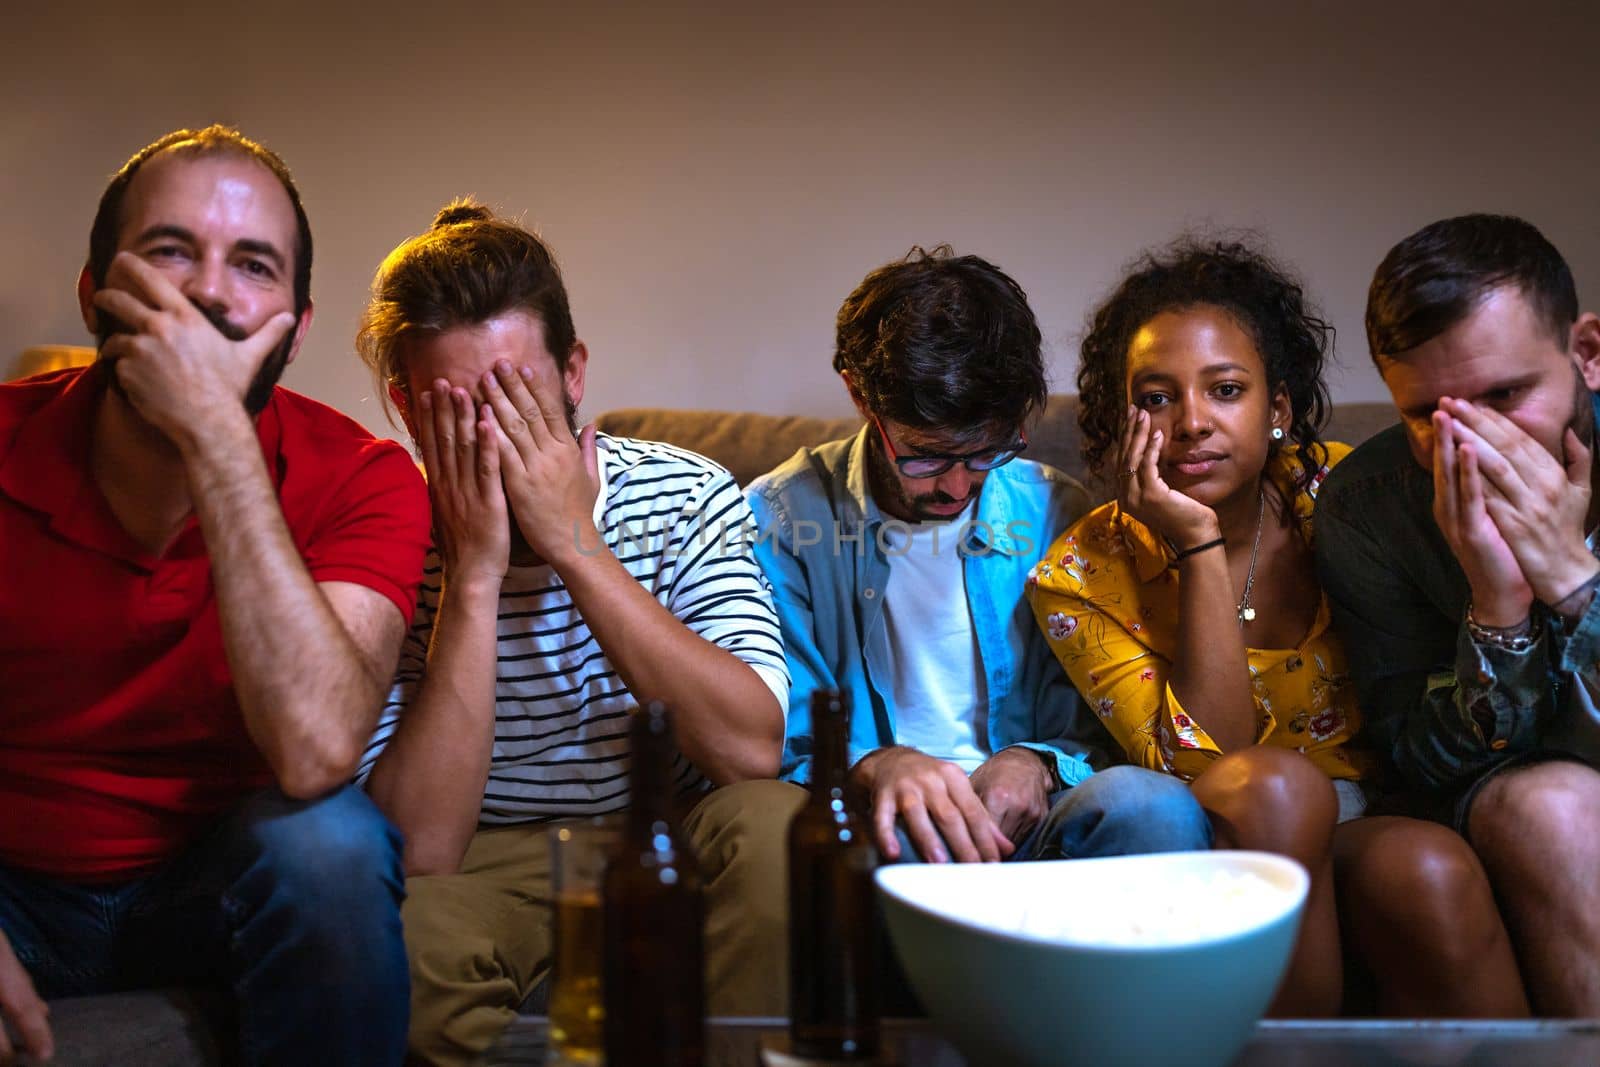 Group of friends watching football game on tv worried and sad because their team is losing. Soccer. Looking at camera. by Hoverstock